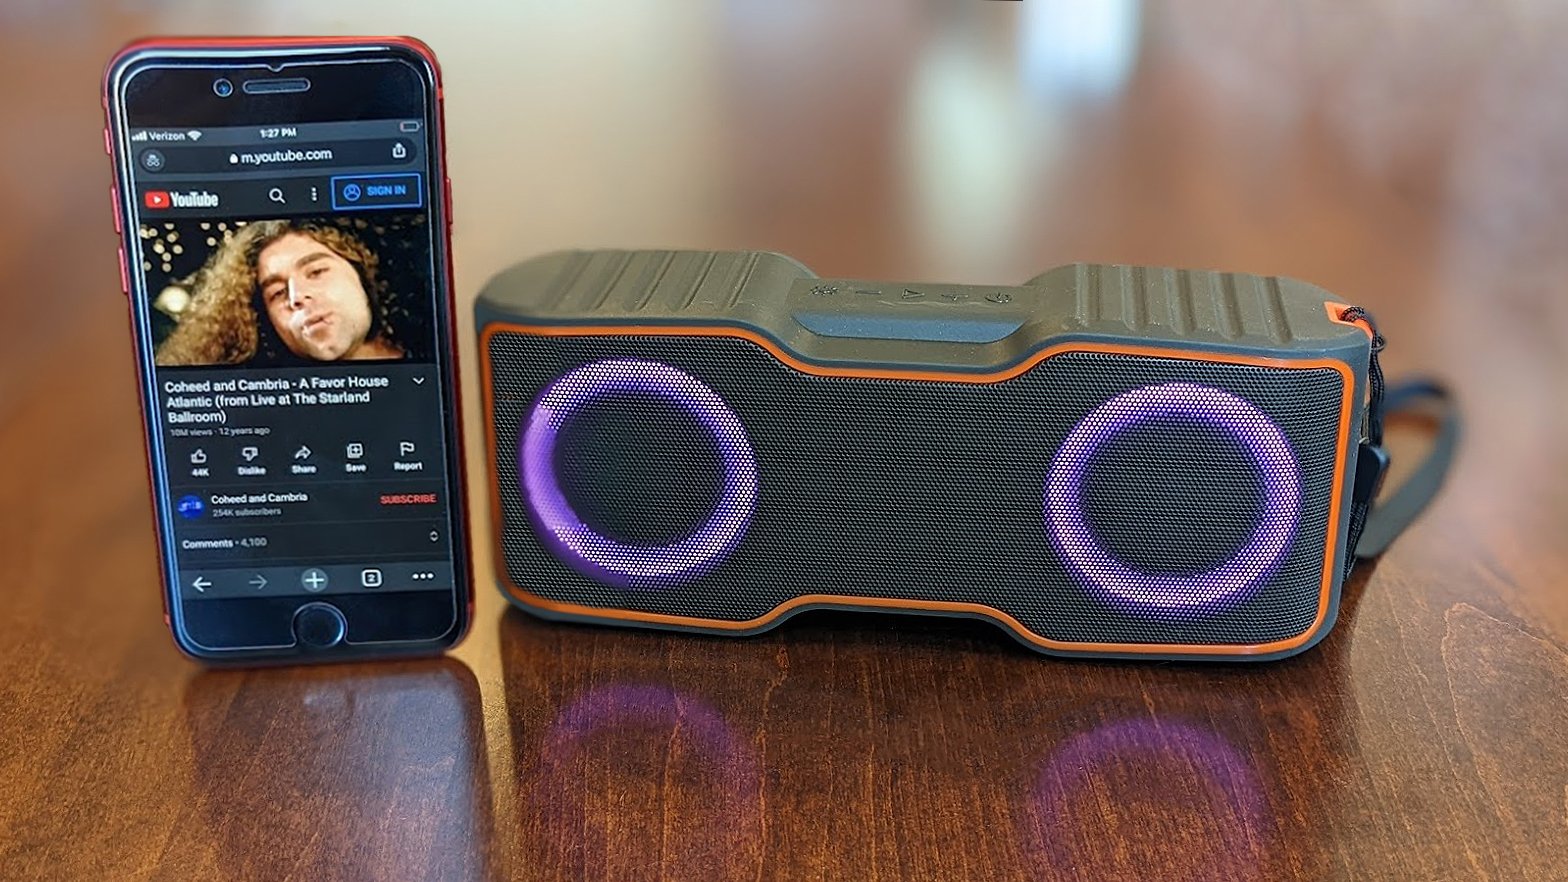 Easysmx Vkf2pro Portable Bluetooth Speaker Next To Iphone Se Playing Youtube